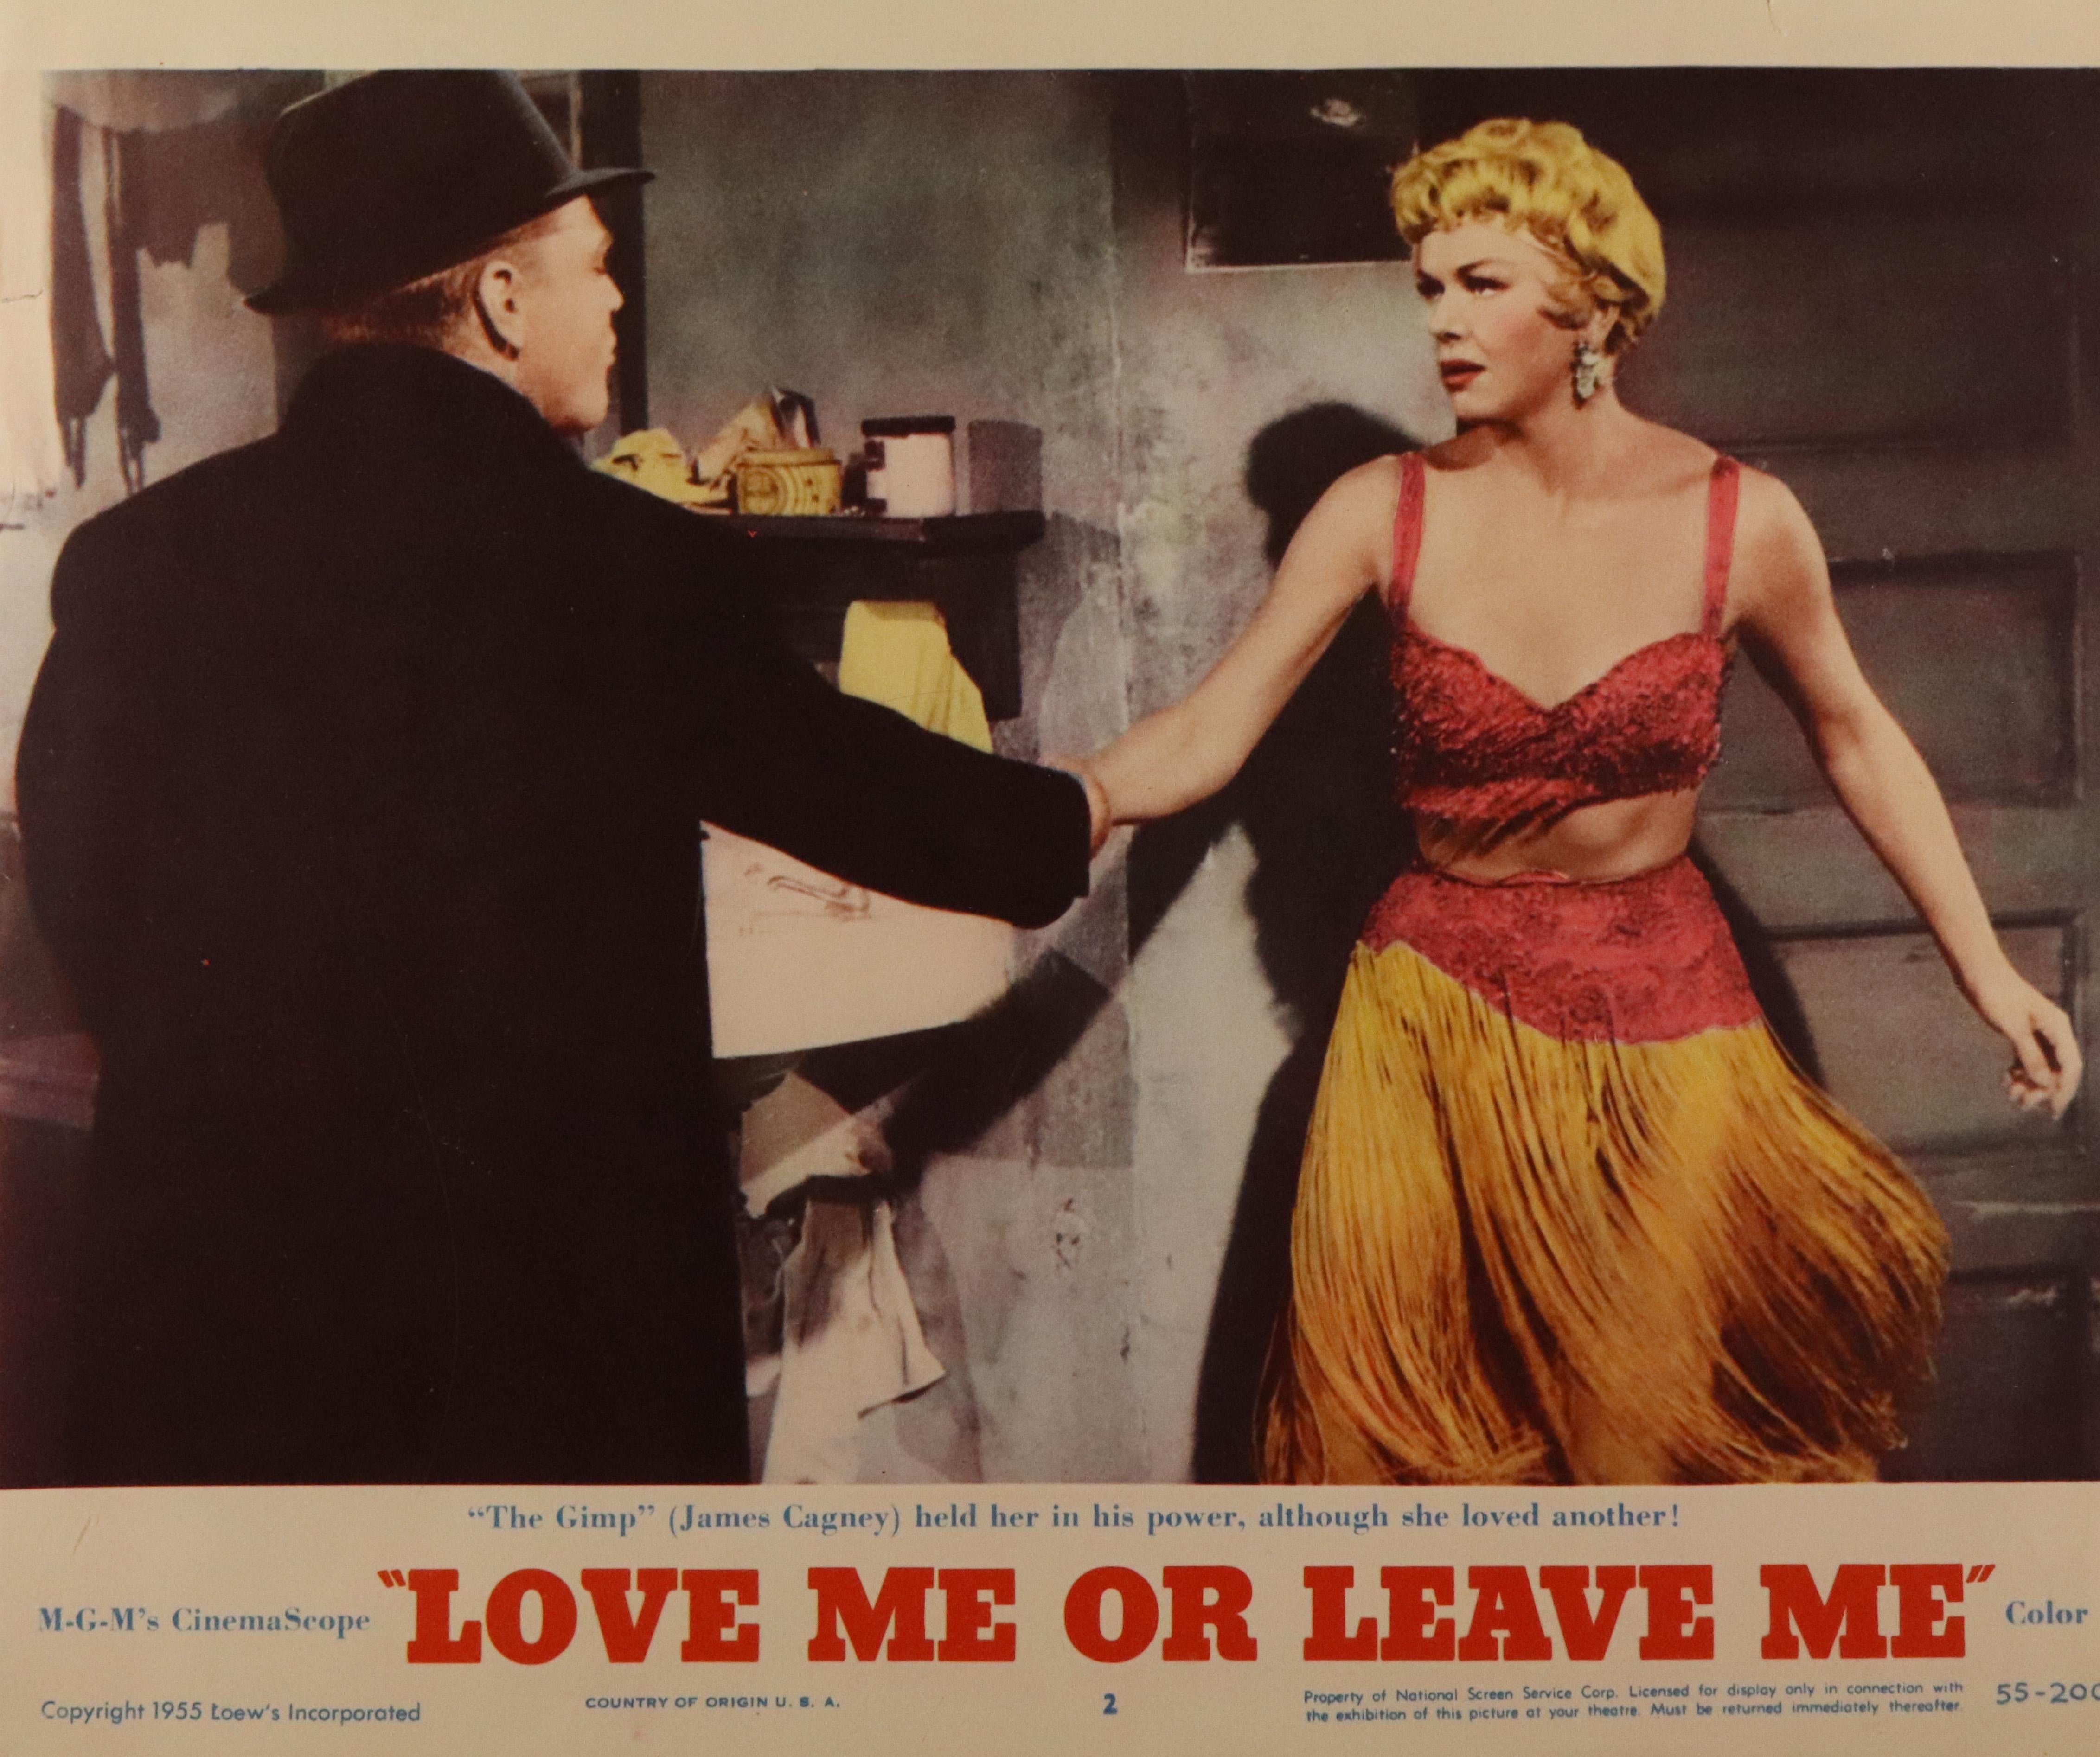 Unknown Interior Print - "Love Me or Leave Me", Lobby Card, USA 1955